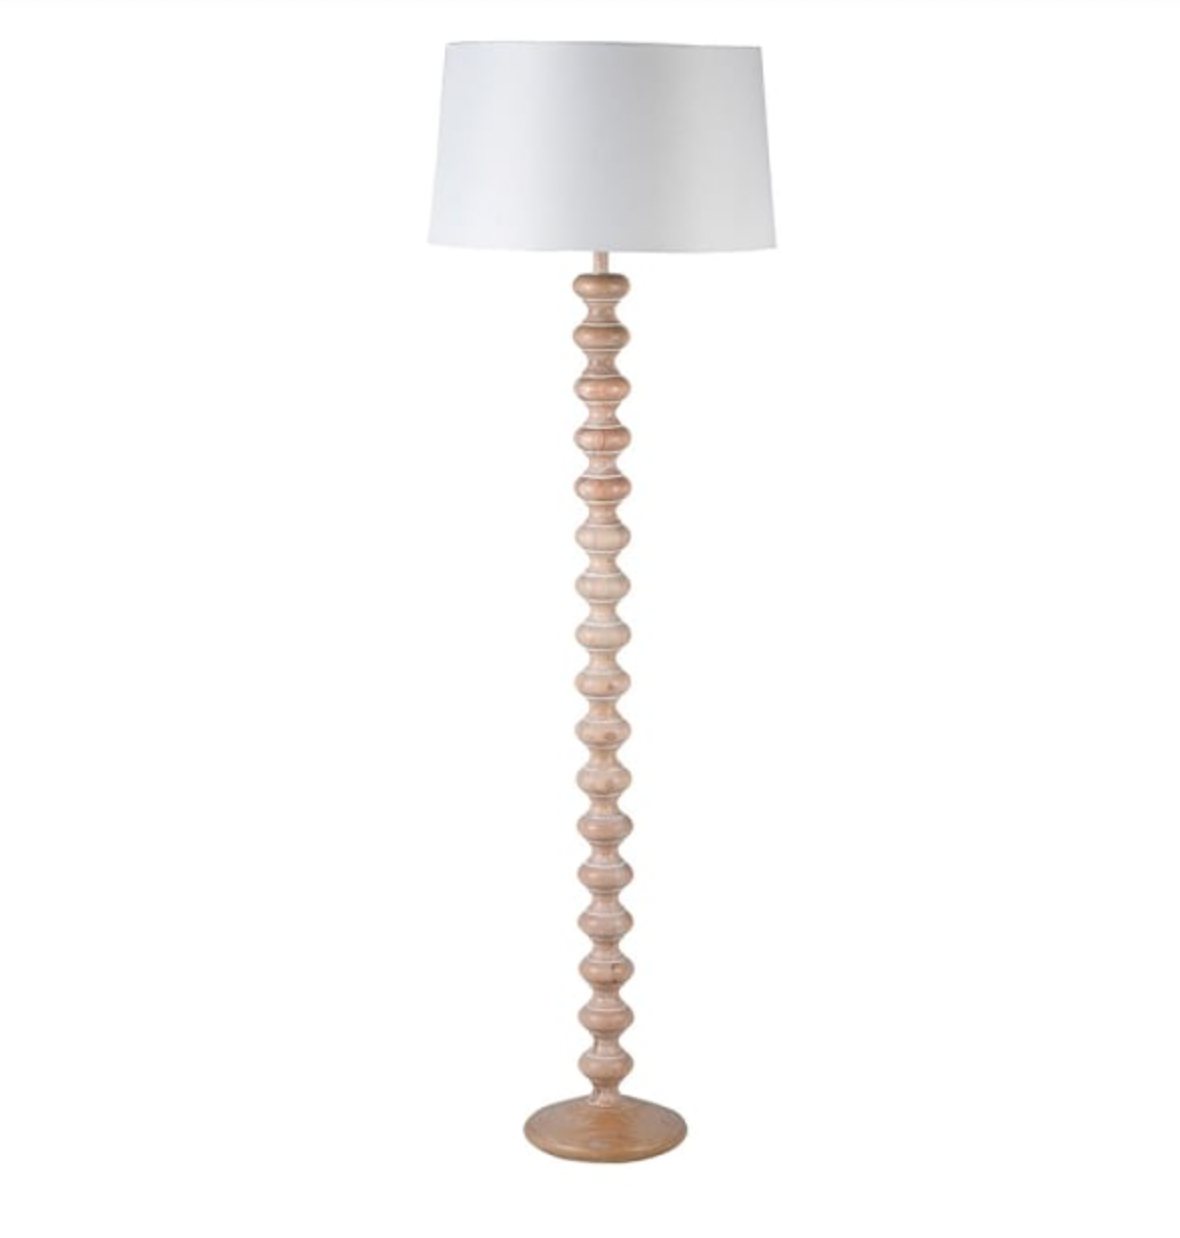 Turned Base Floor Lamp with White Shade